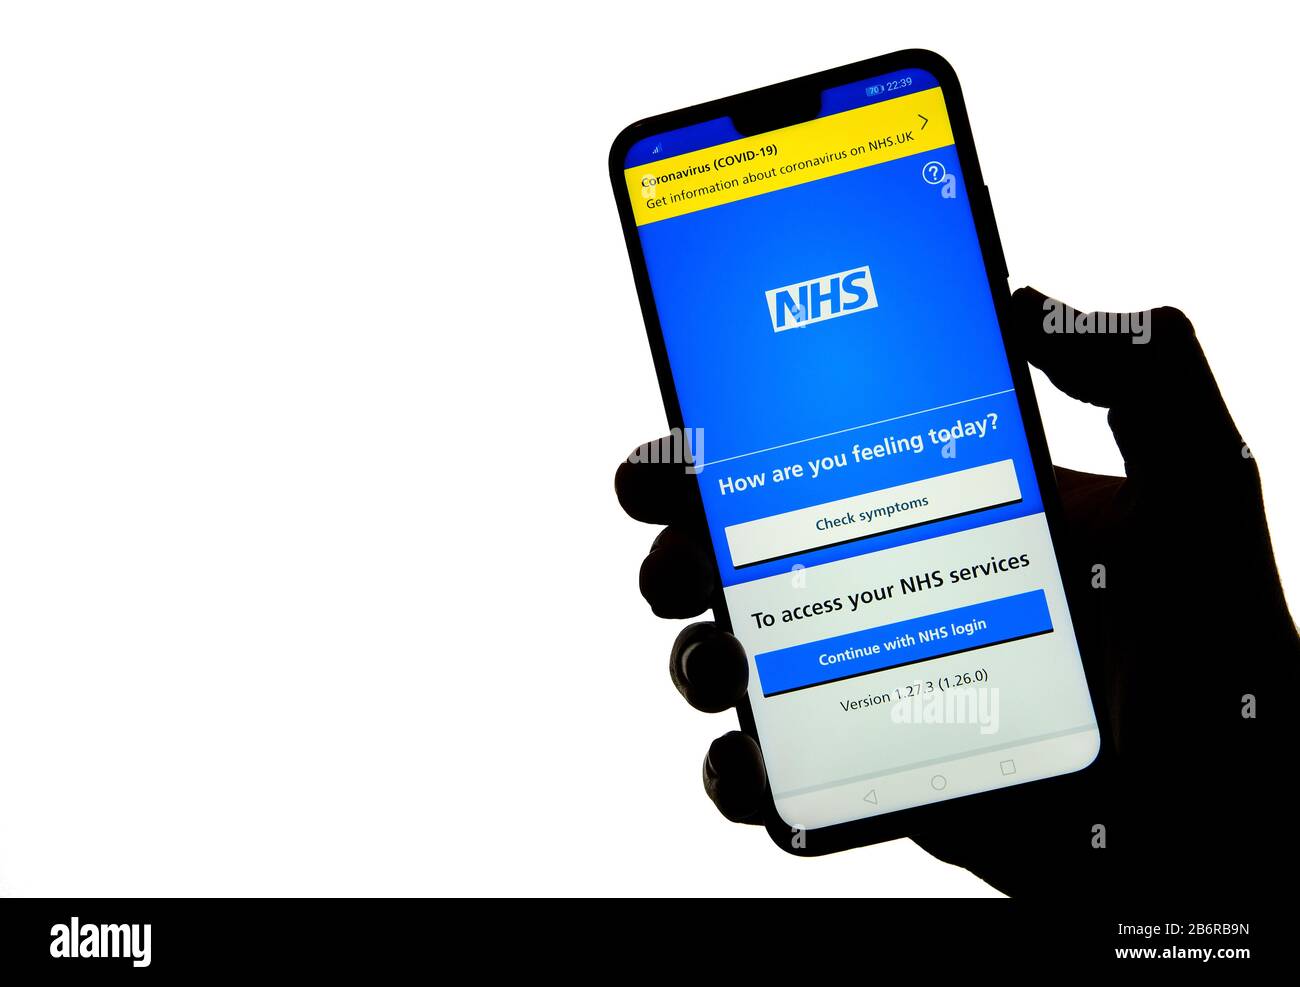 Stone / United Kingdom - March 11 2020: NHS app on the silhouette of a smartphone hold in hand. Stock Photo